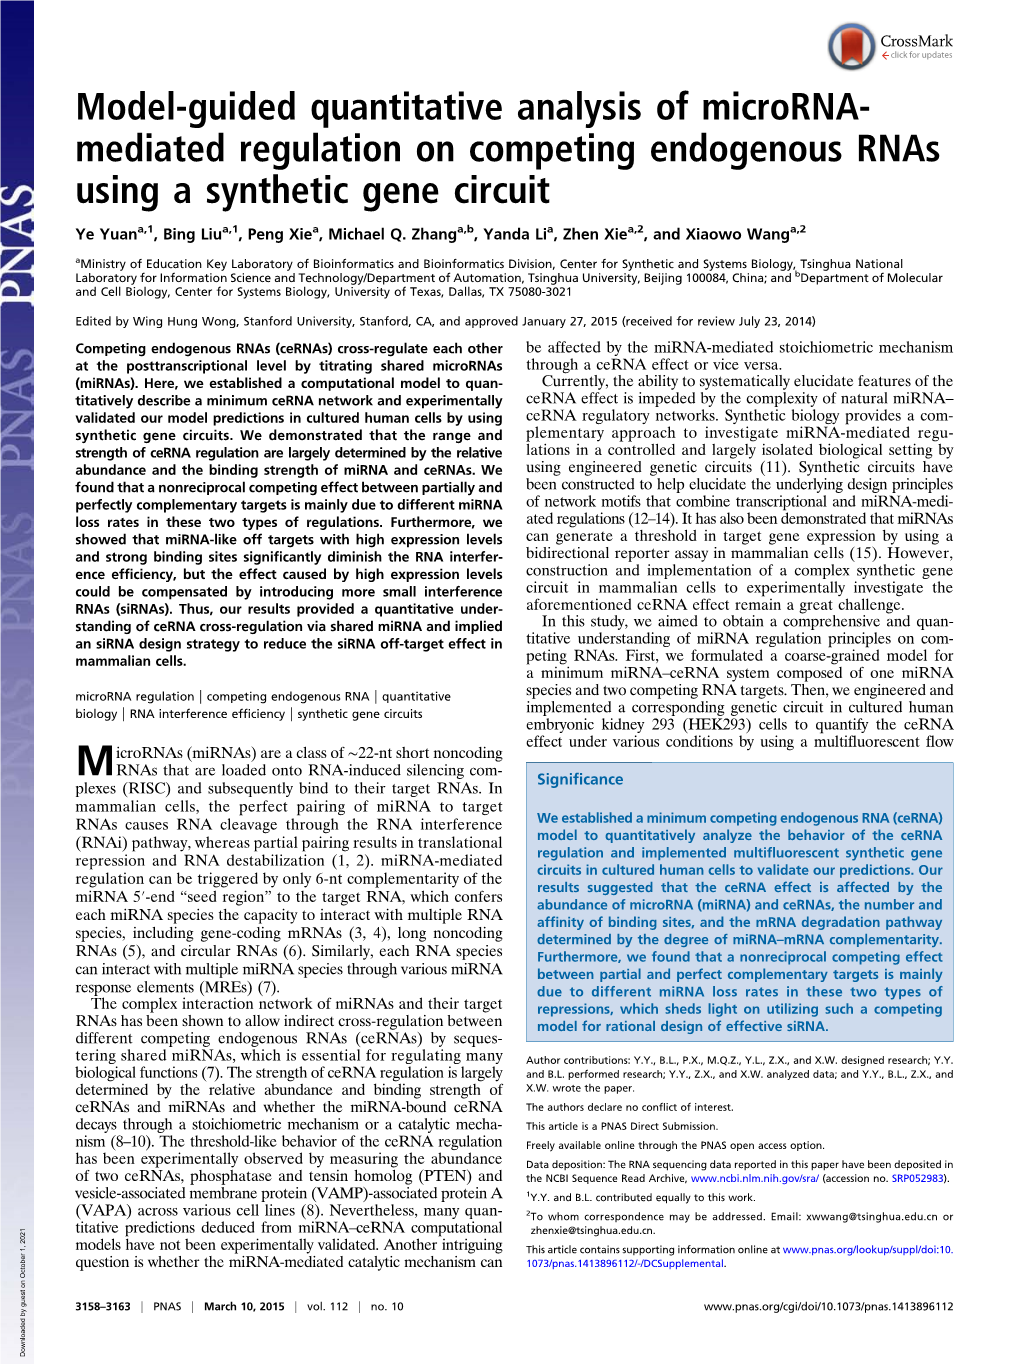 Model-Guided Quantitative Analysis of Microrna- Mediated Regulation on Competing Endogenous Rnas Using a Synthetic Gene Circuit